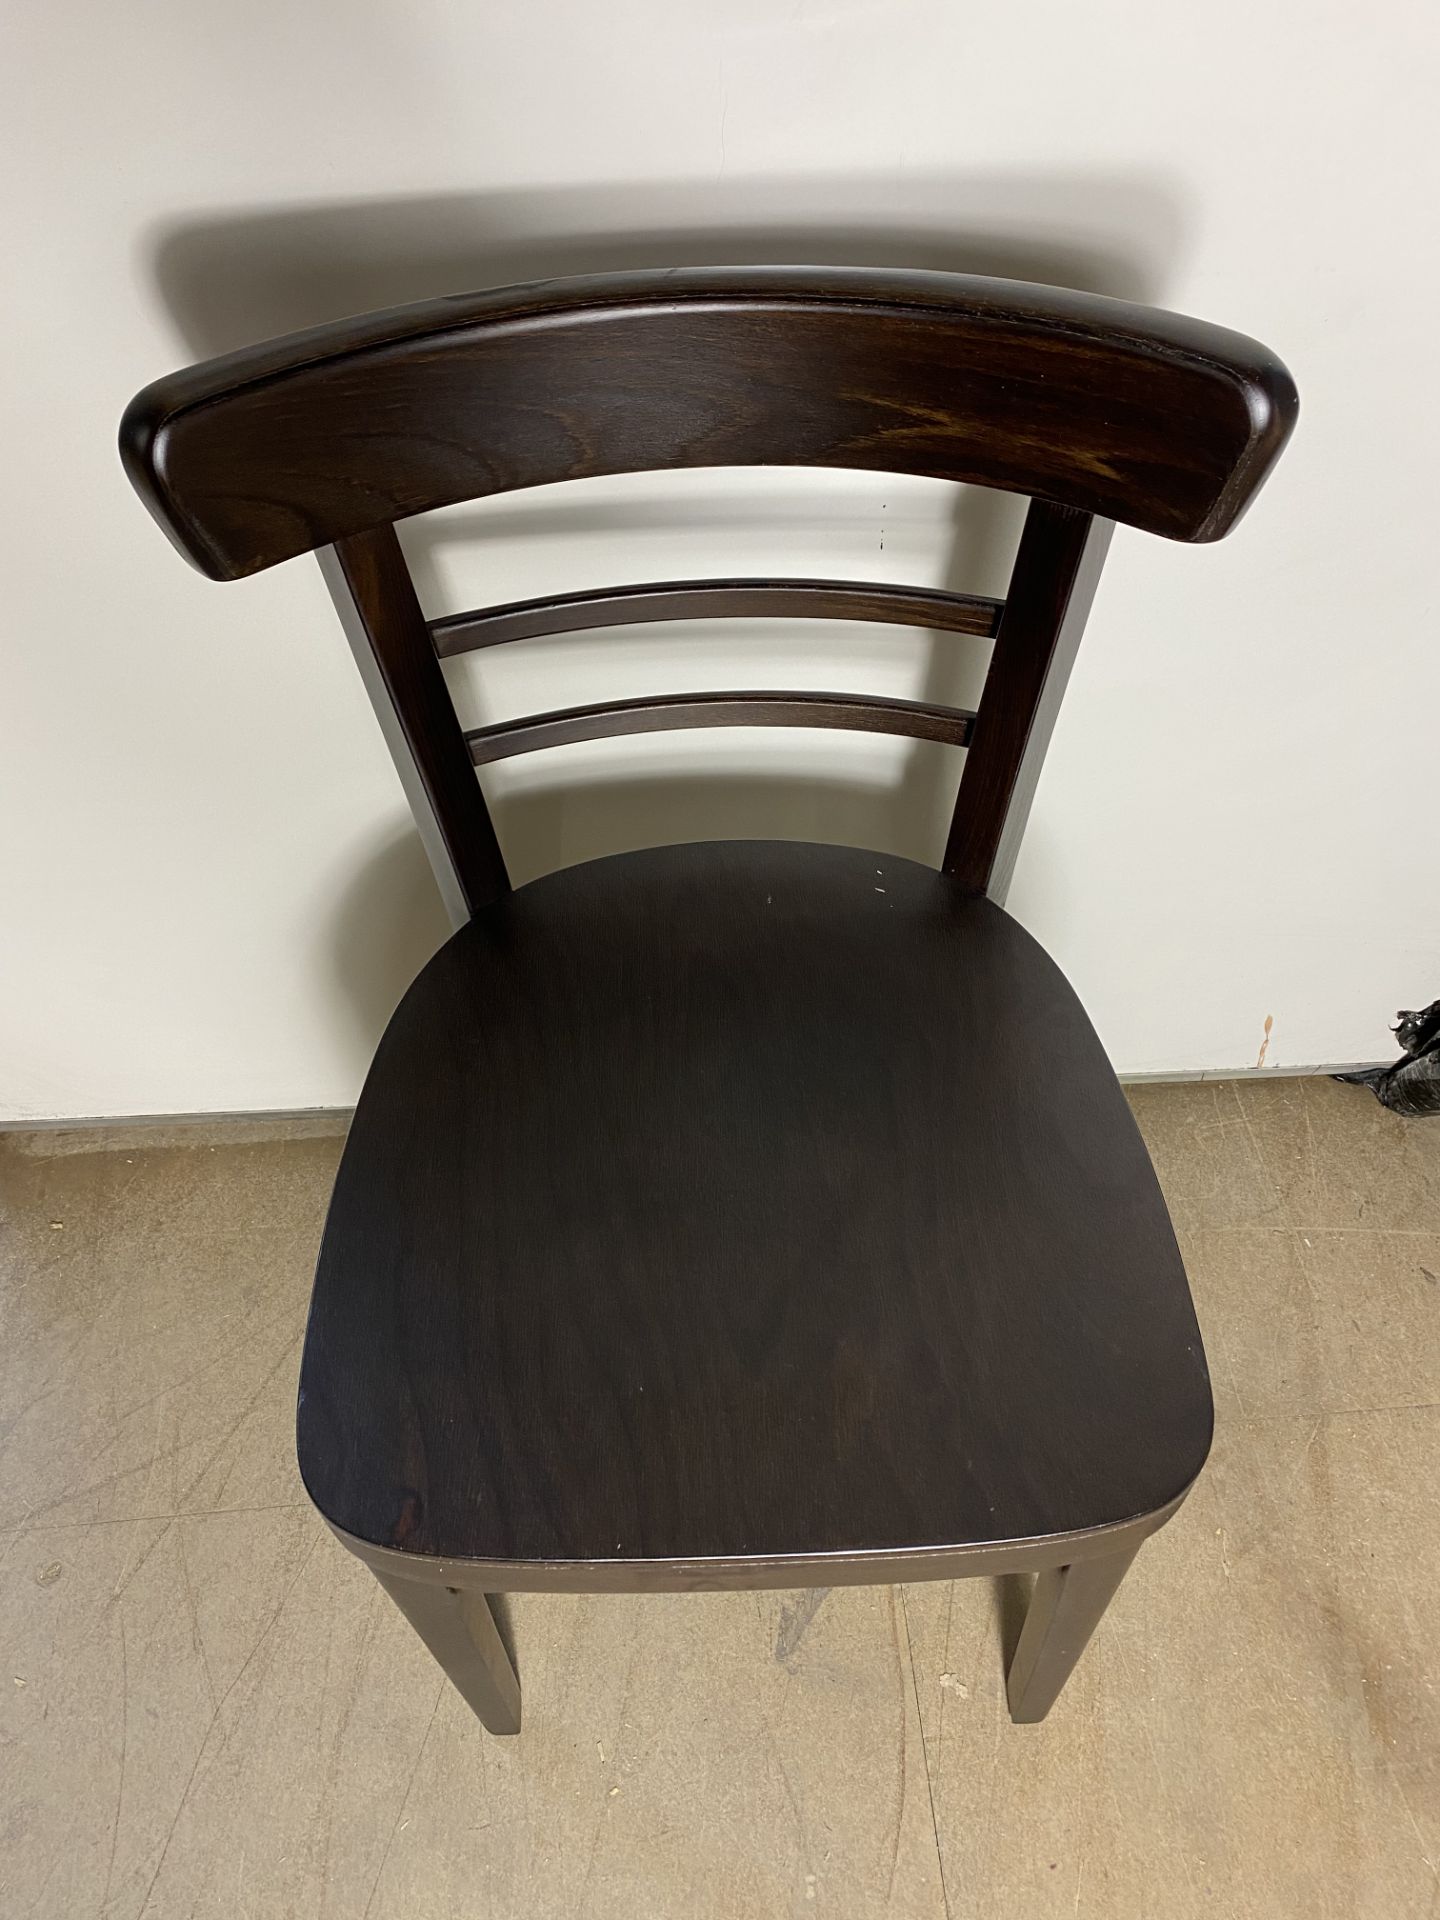 4 x Espresso Side Chairs | BE 3057983 - Image 2 of 6